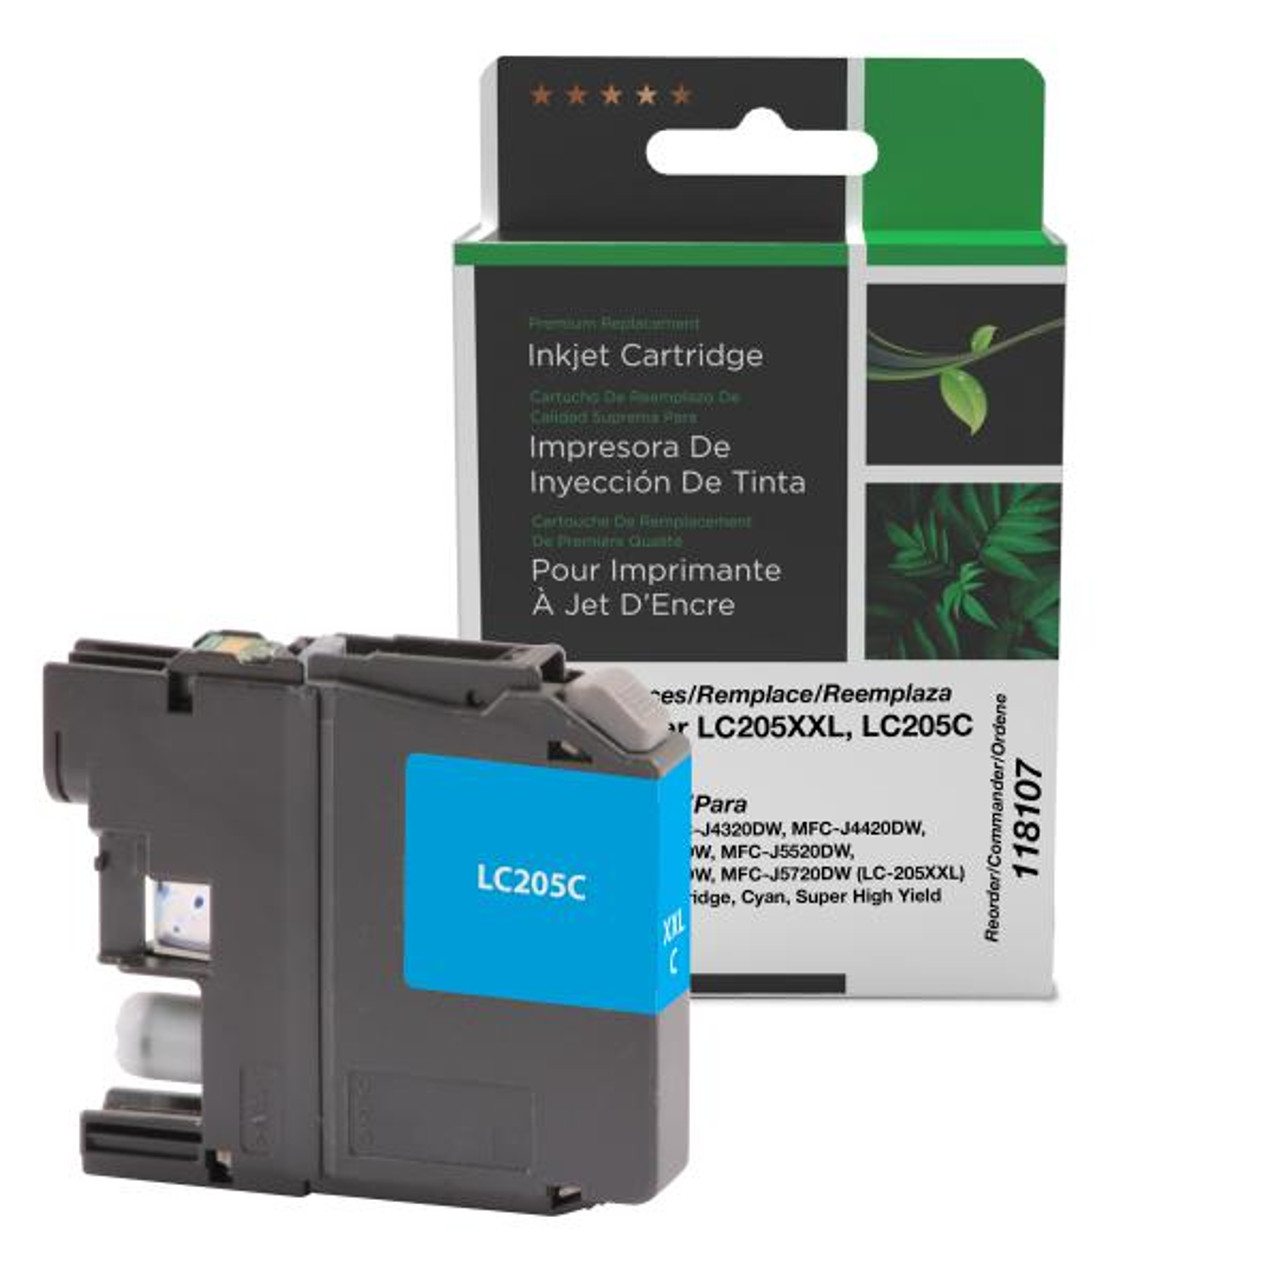 Super High Yield Cyan Ink Cartridge for Brother LC205XXL-1